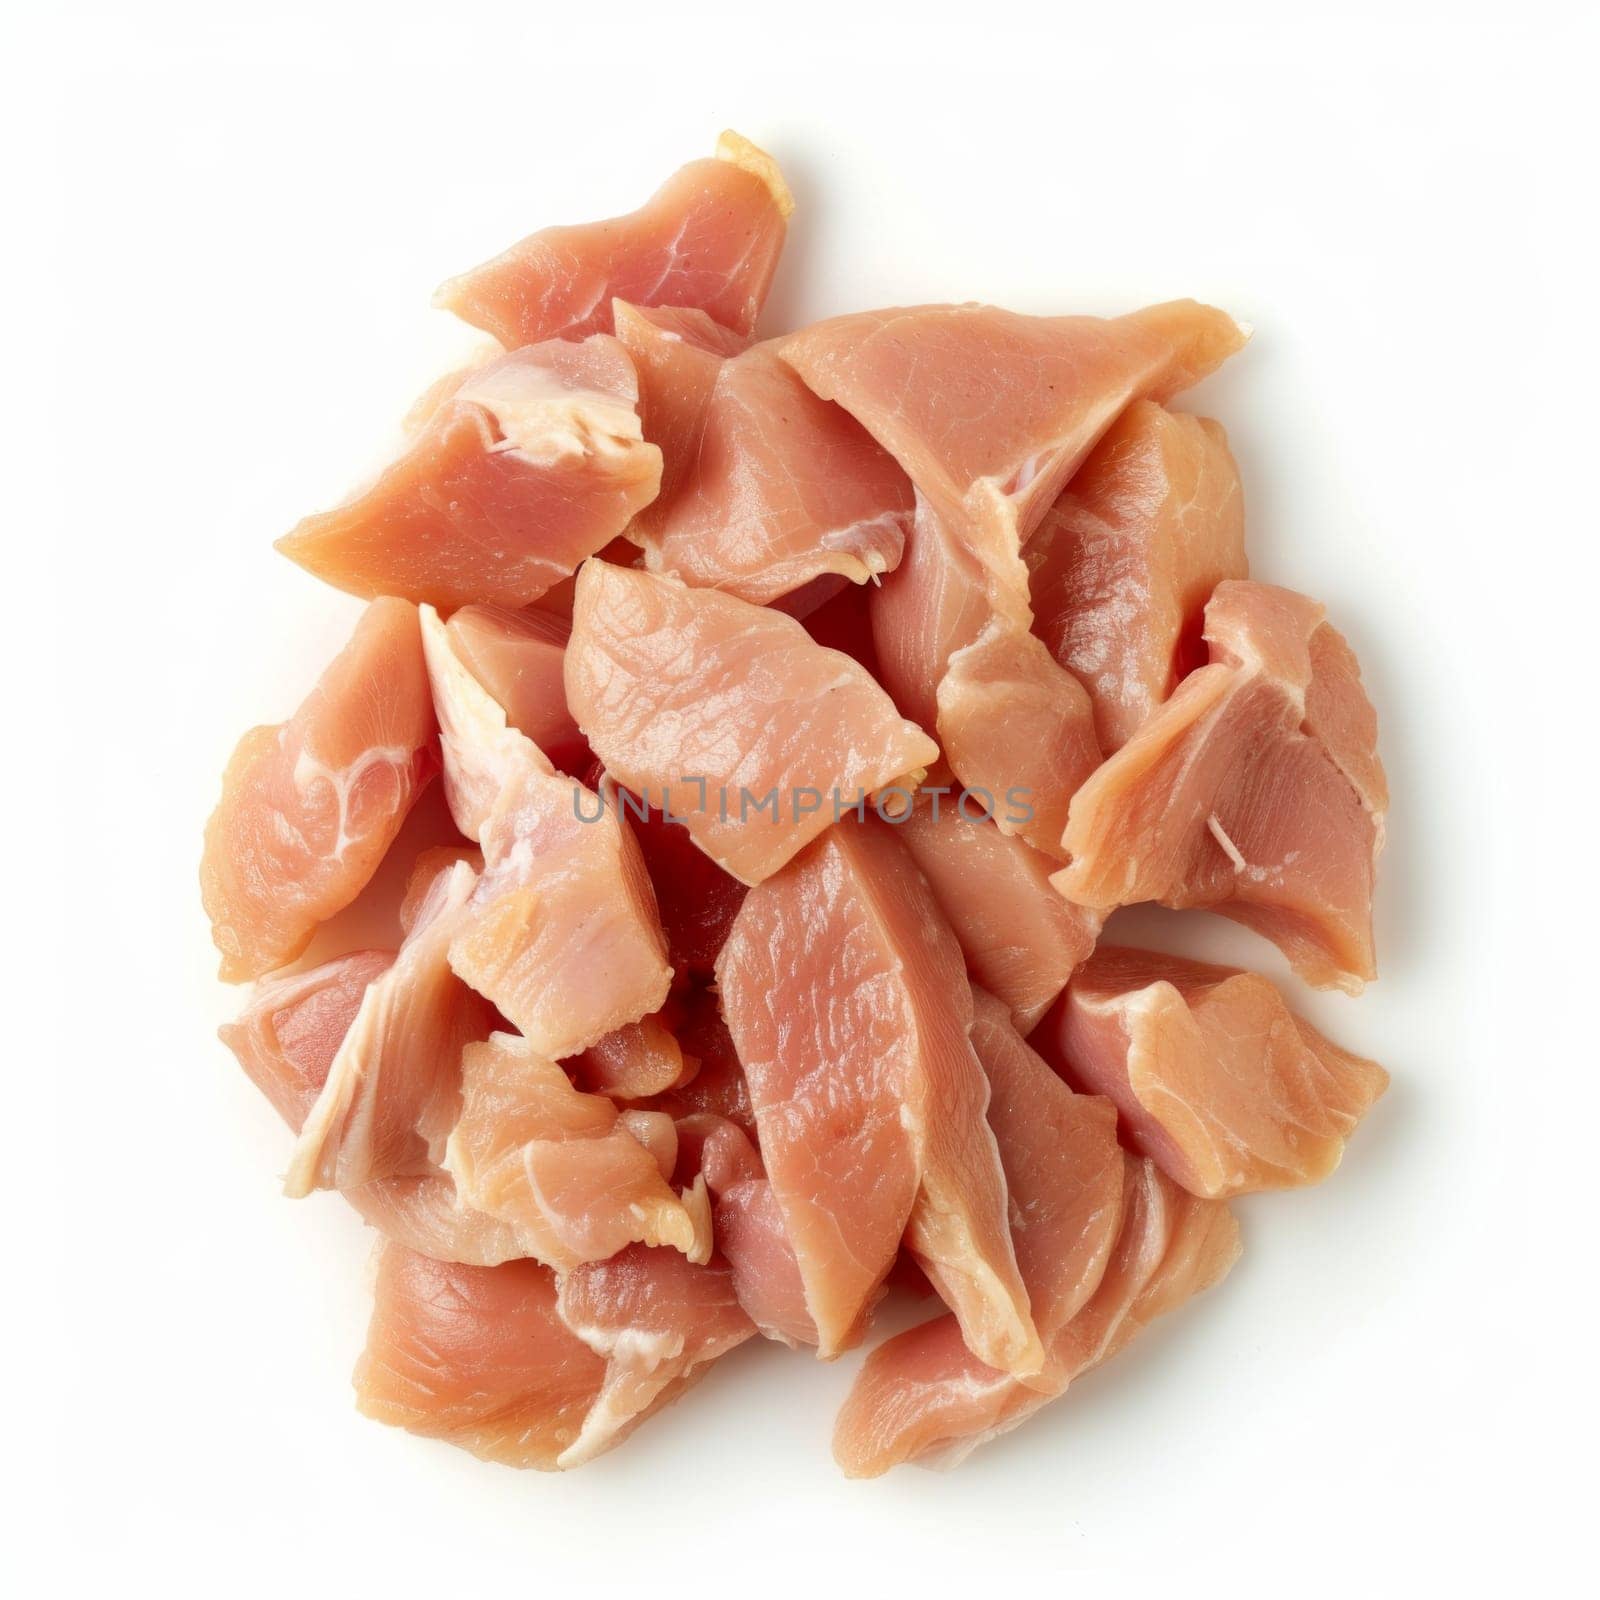 raw chicken pieces isolated on white background.